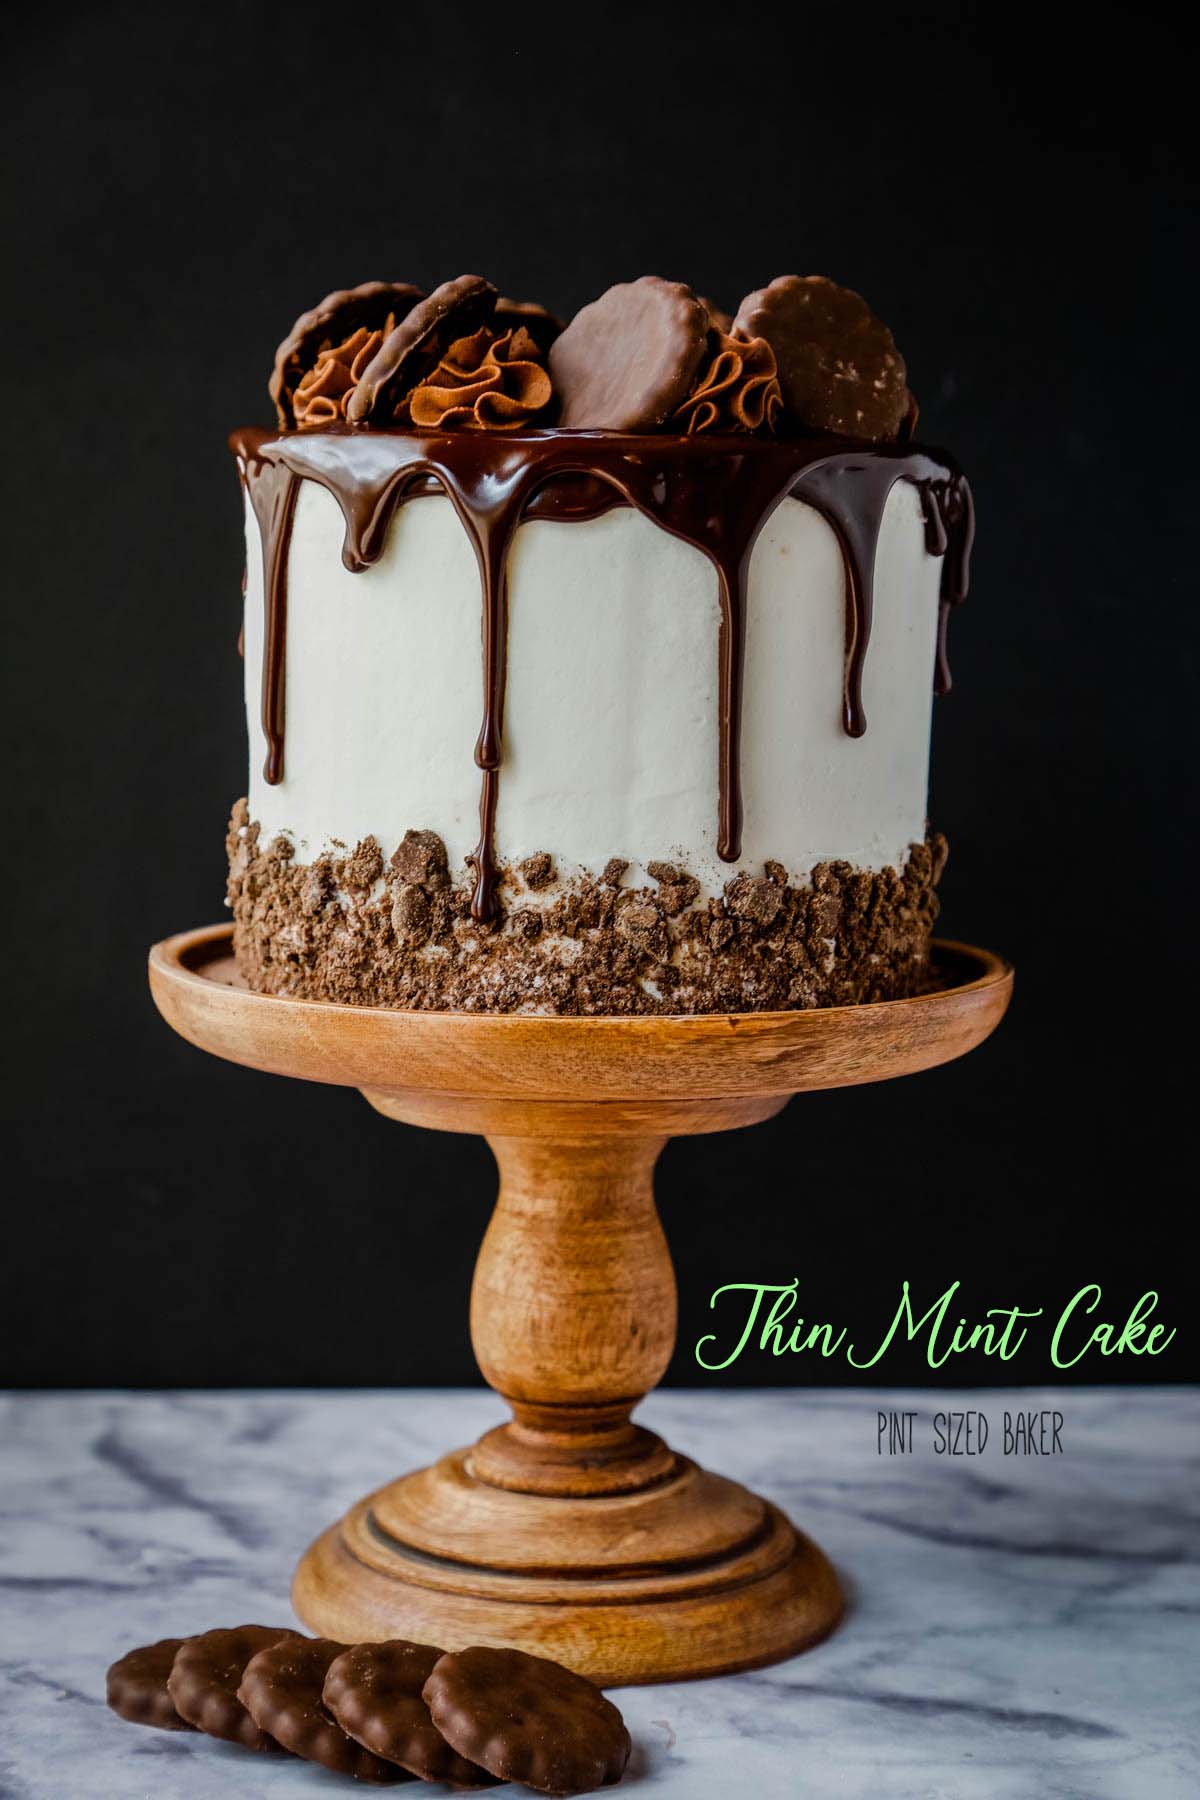 A Thin Mint Cookie Cake on a wooden cake pedestal.